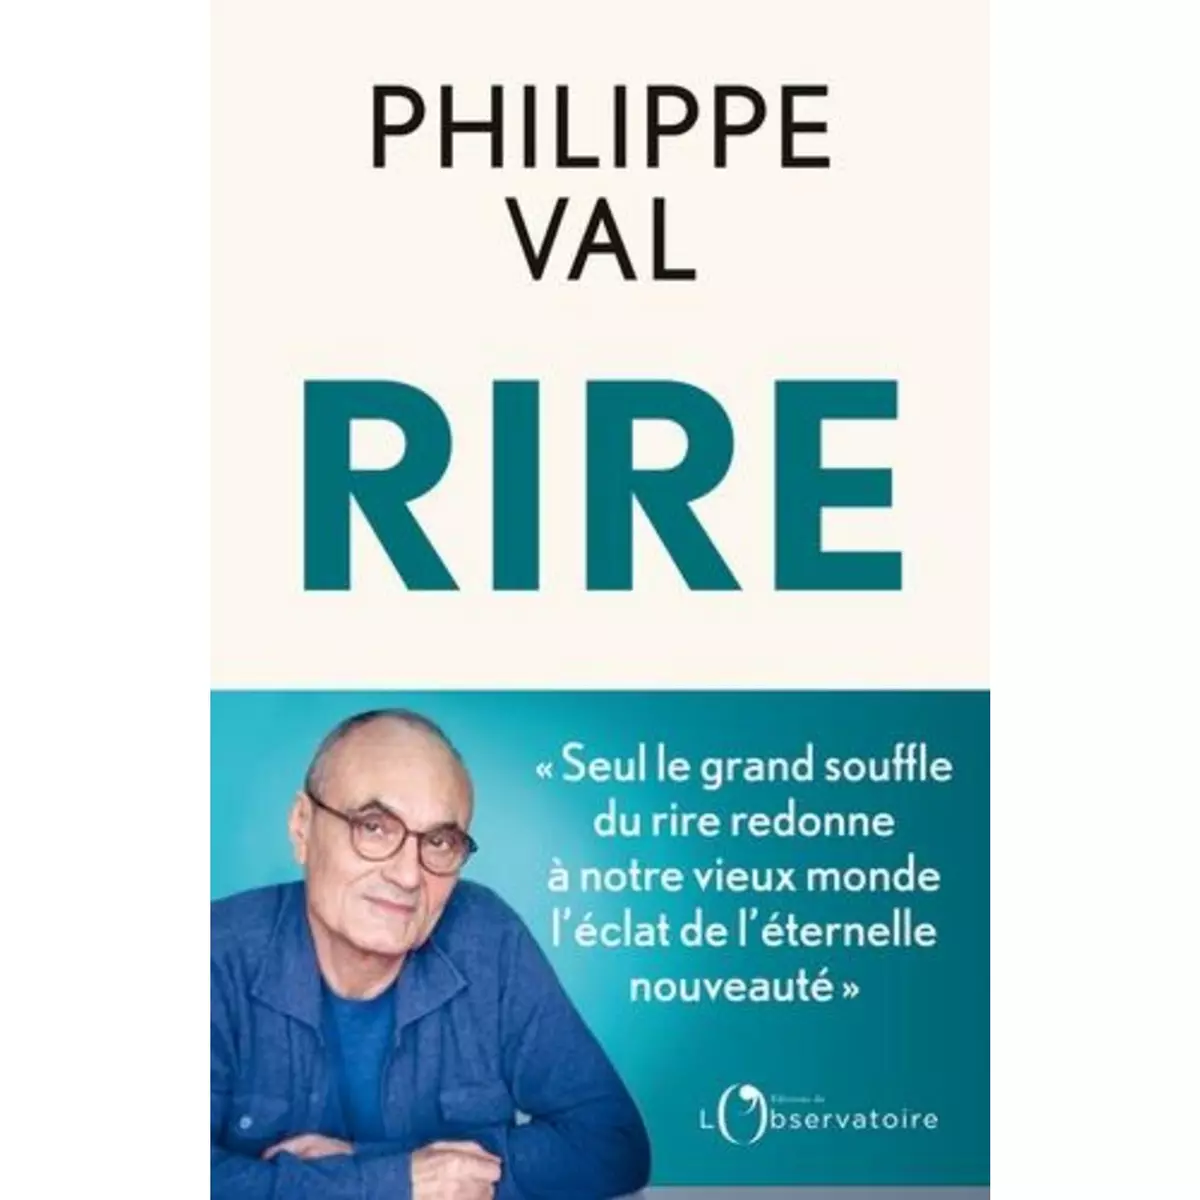  RIRE, Val Philippe